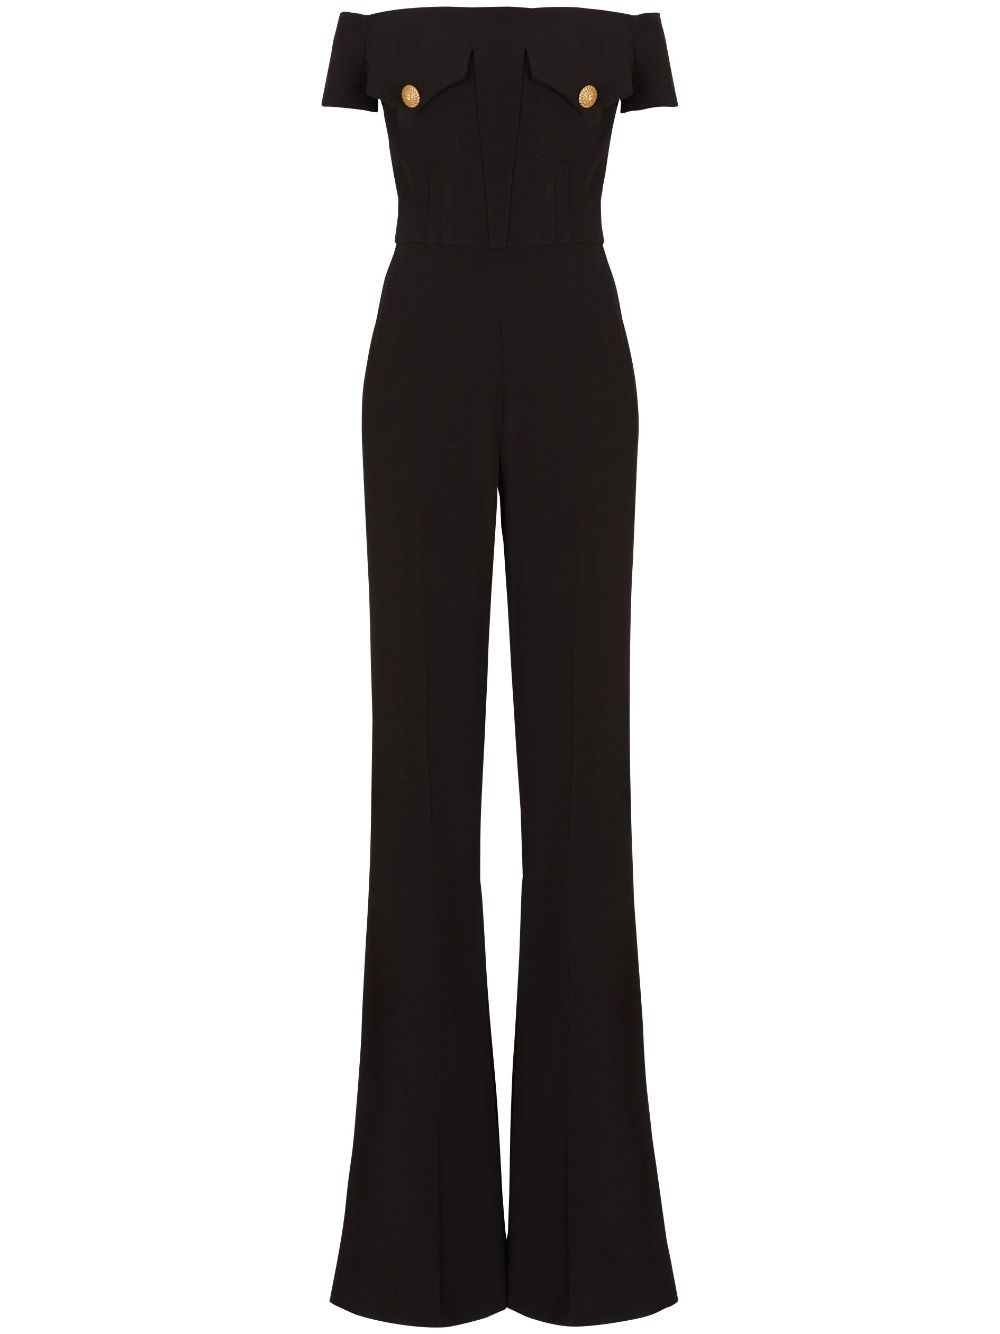 Shop Balmain Stunning Black Jumpsuit With Jewel Accents For Women